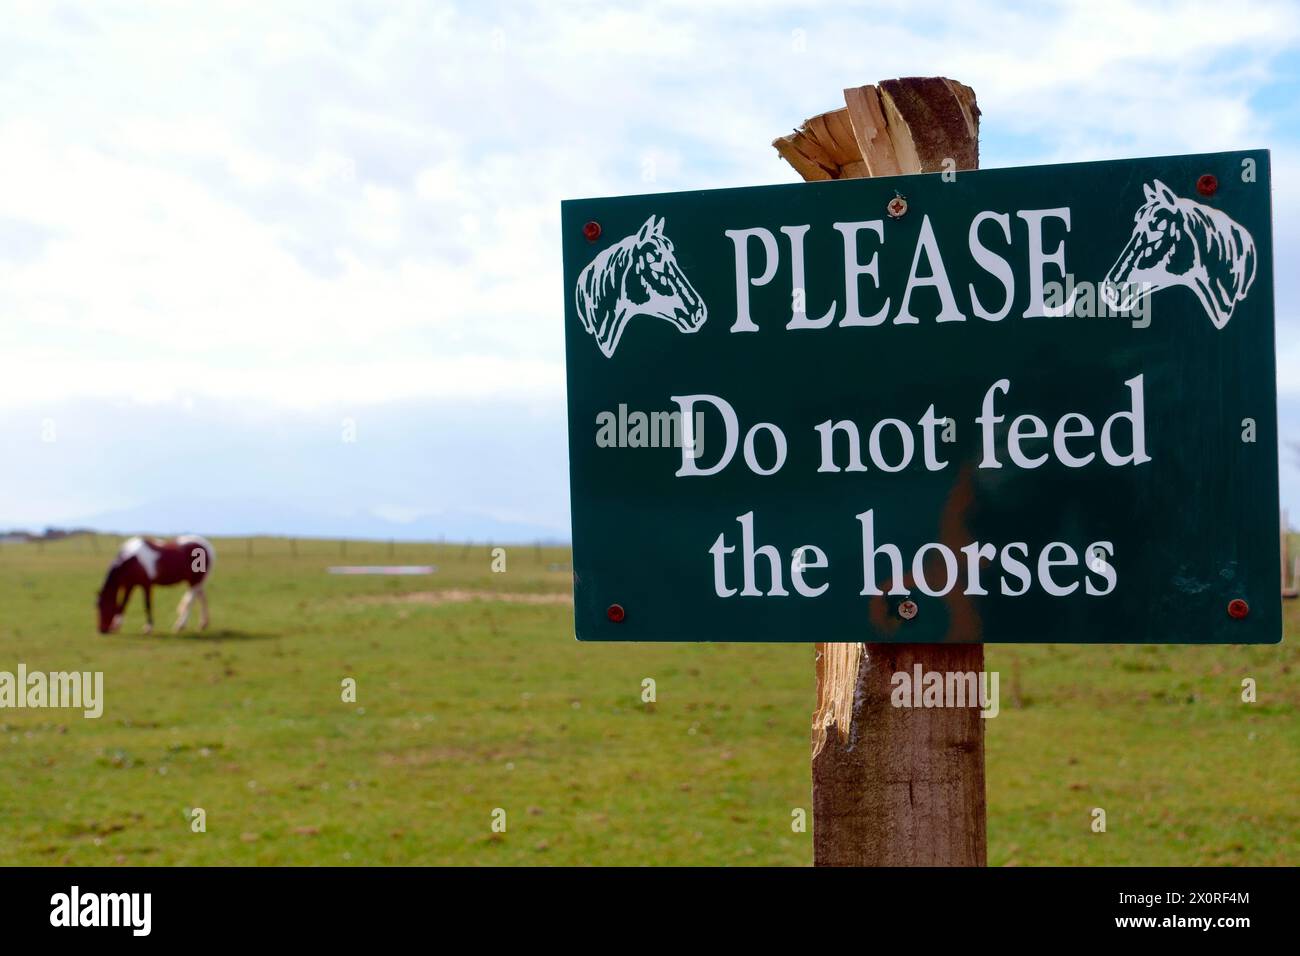 Please do not feed the horses sign Stock Photo